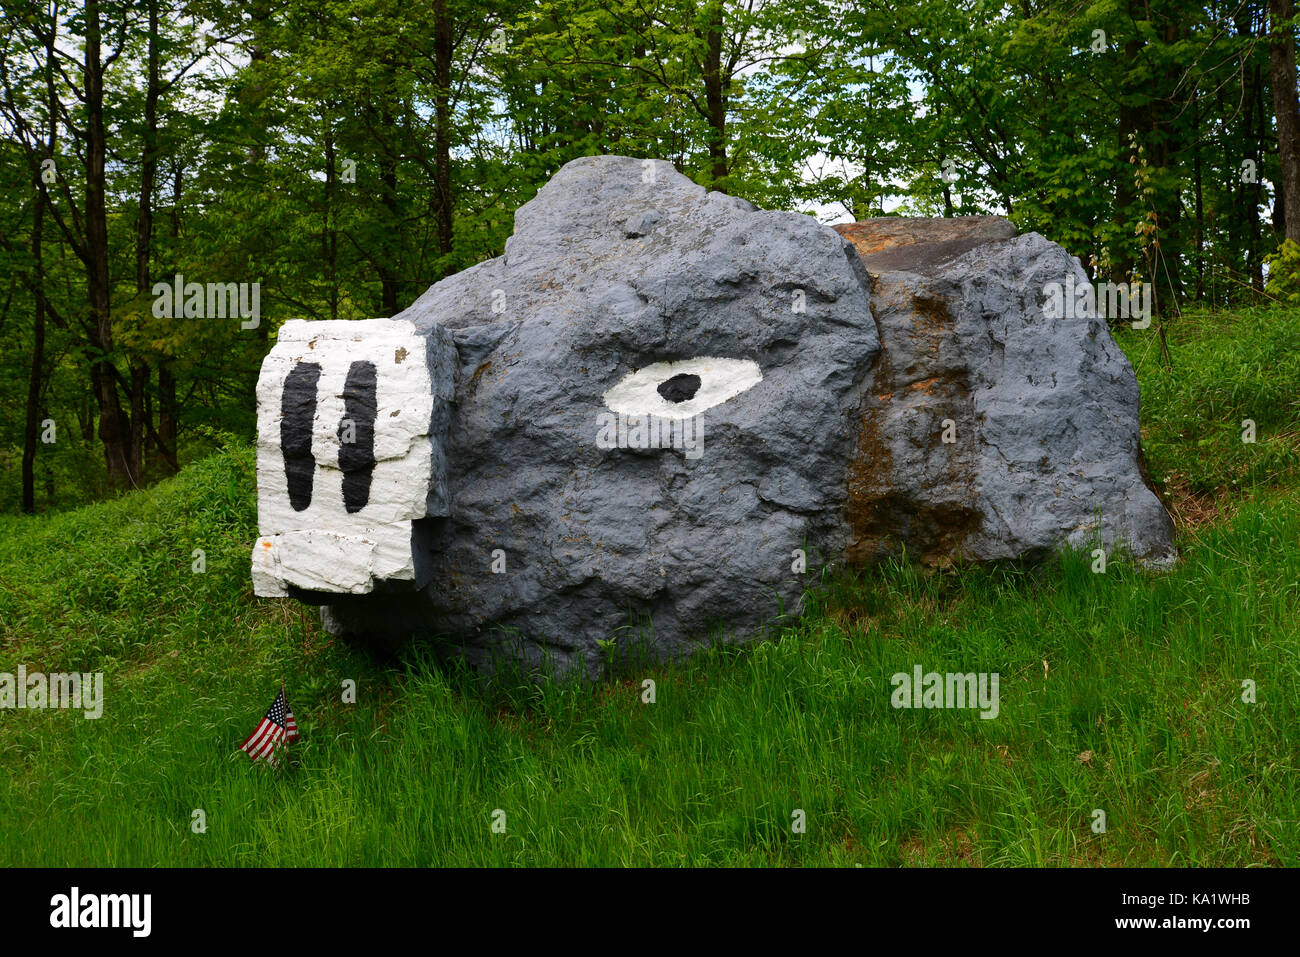 Large rock painted to look like a pig along Route 30 in the Adirondack Park, NY in summer. Stock Photo